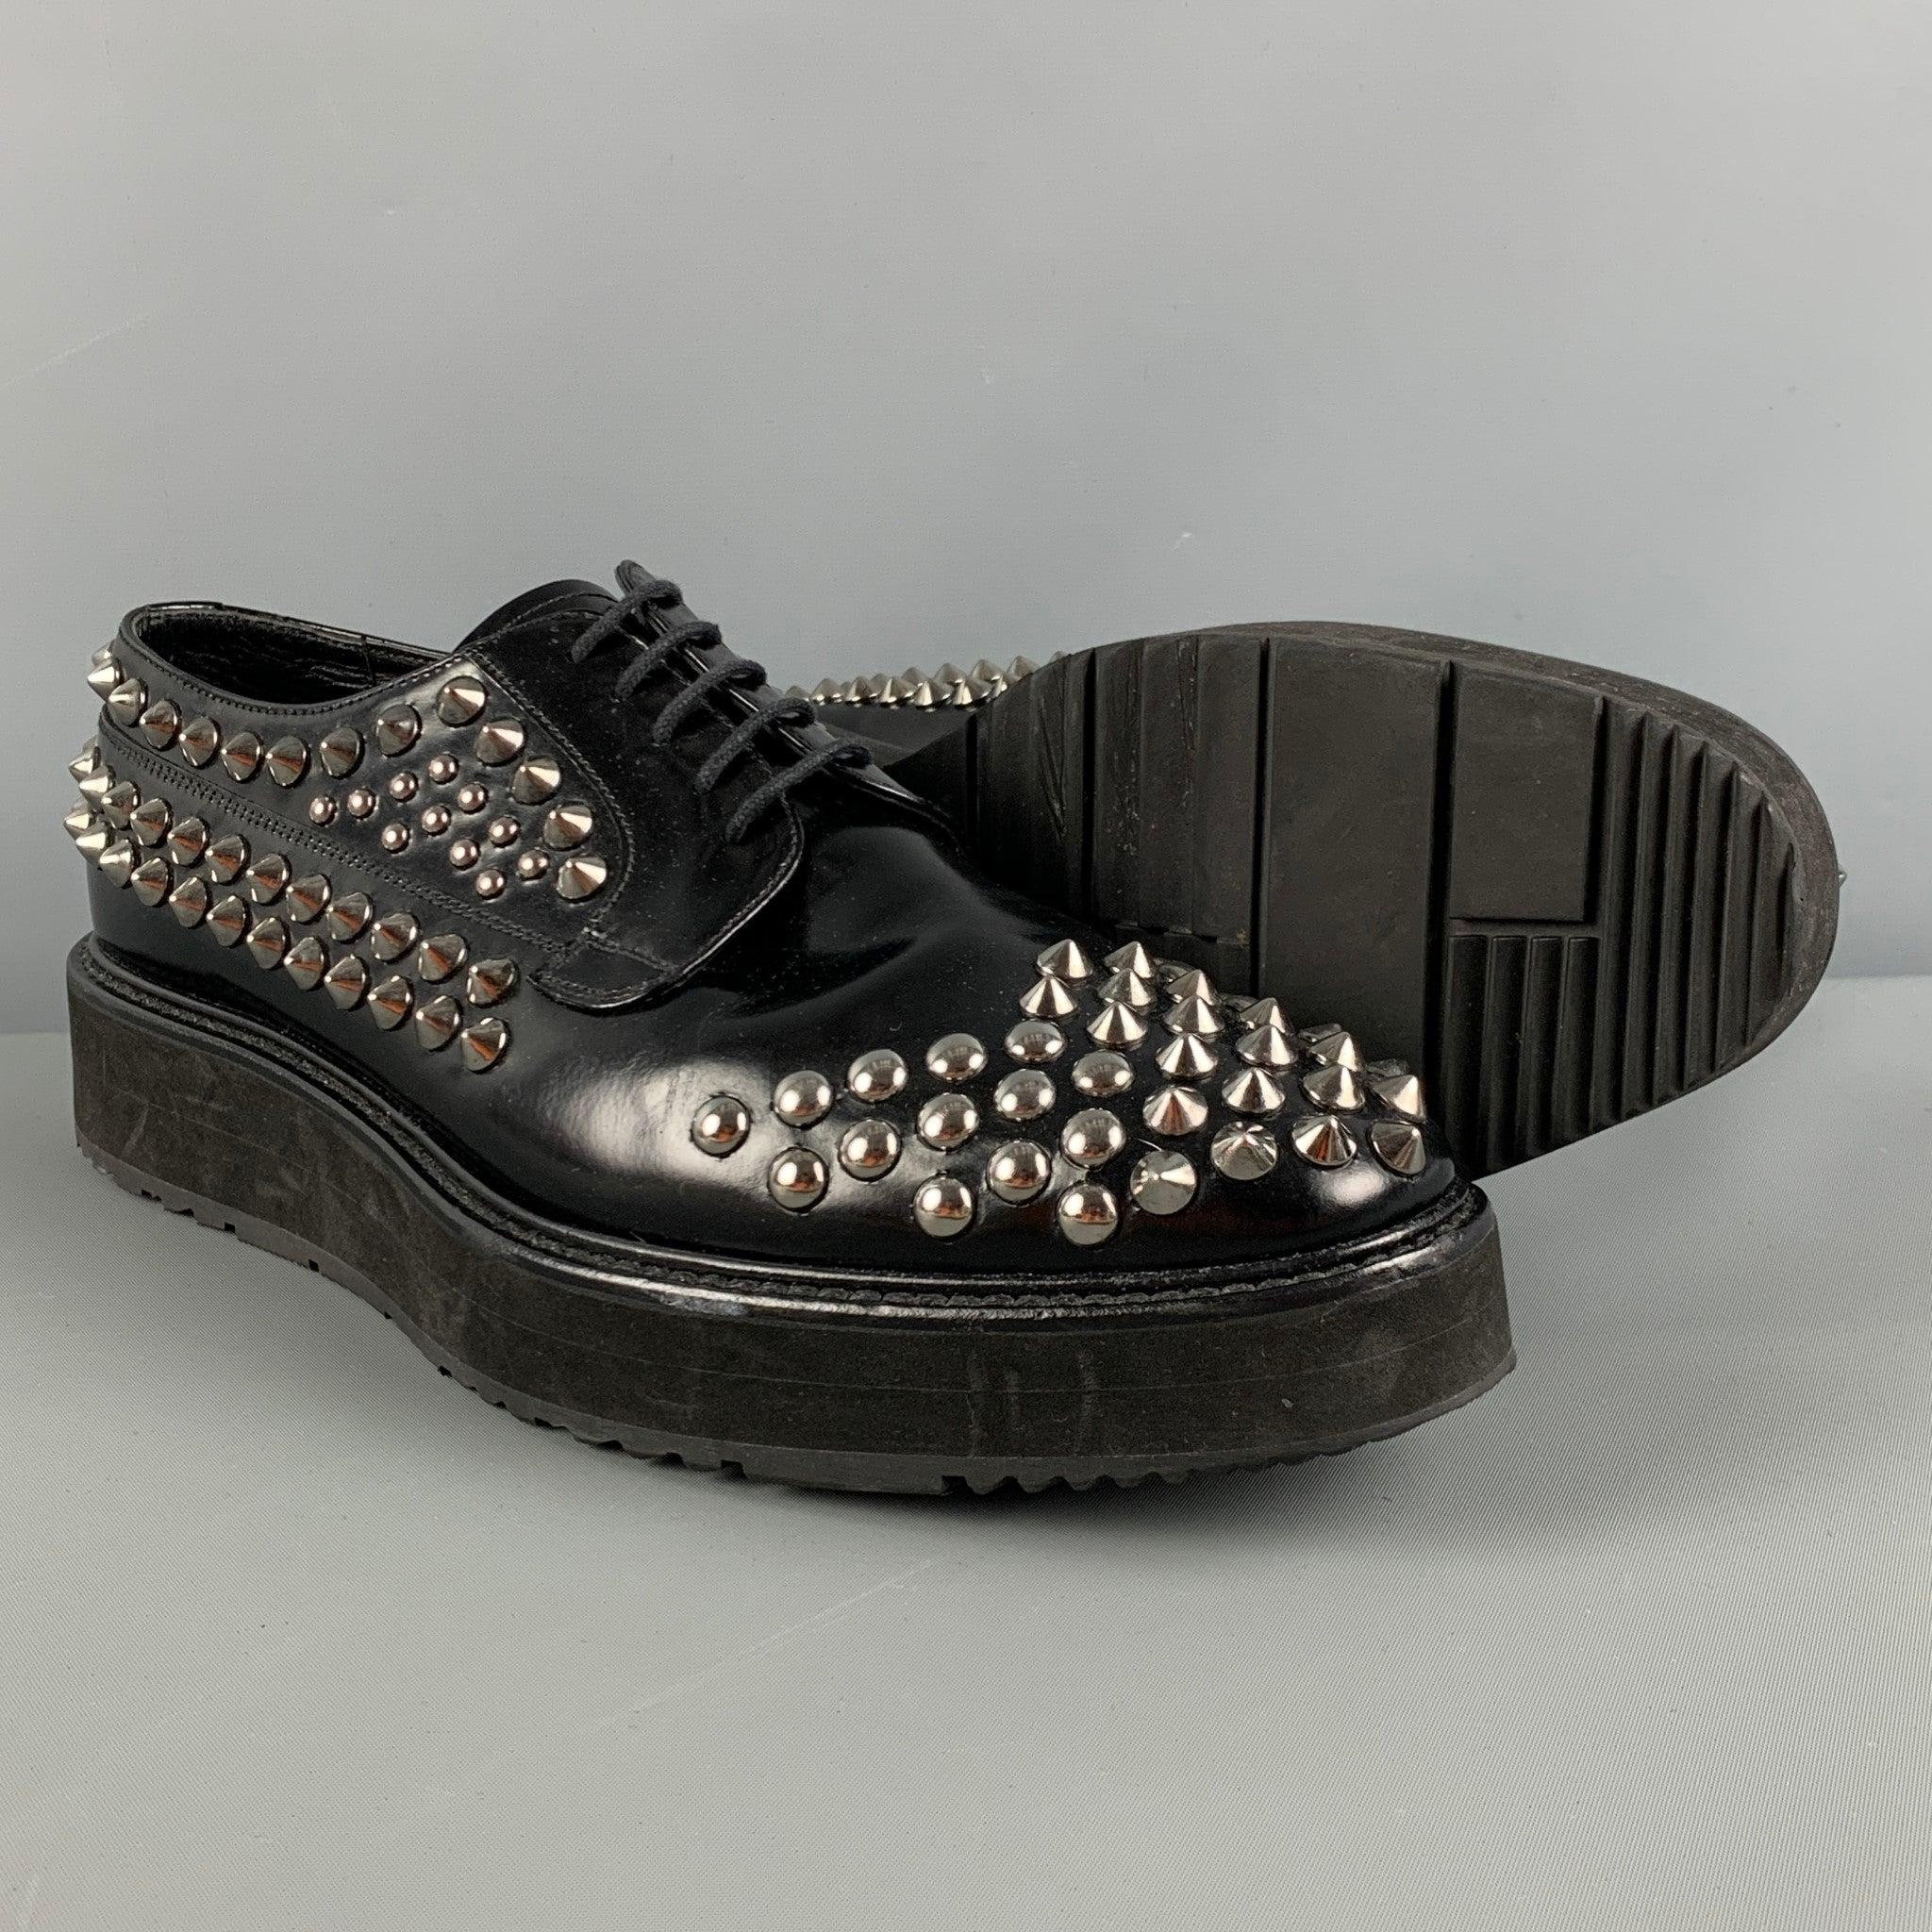 PRADA Size 9 Black Silver Studded Leather Platform Lace Up Shoes In Good Condition For Sale In San Francisco, CA